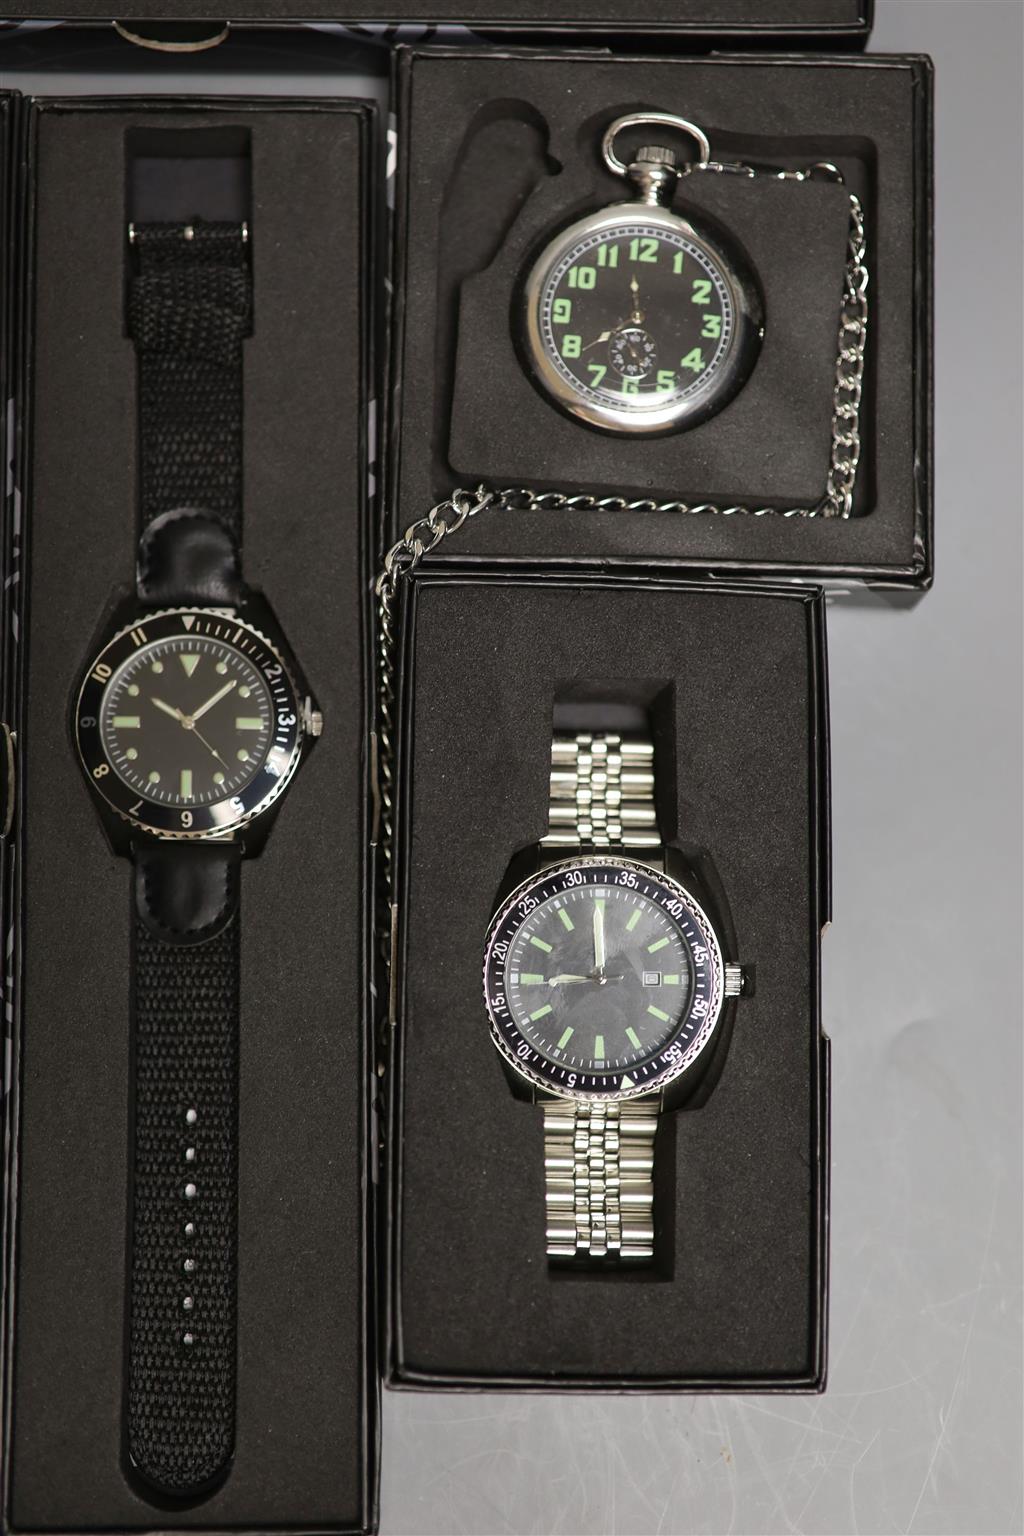 Twelve Military and other modern collectors watches by Eaglemoss,